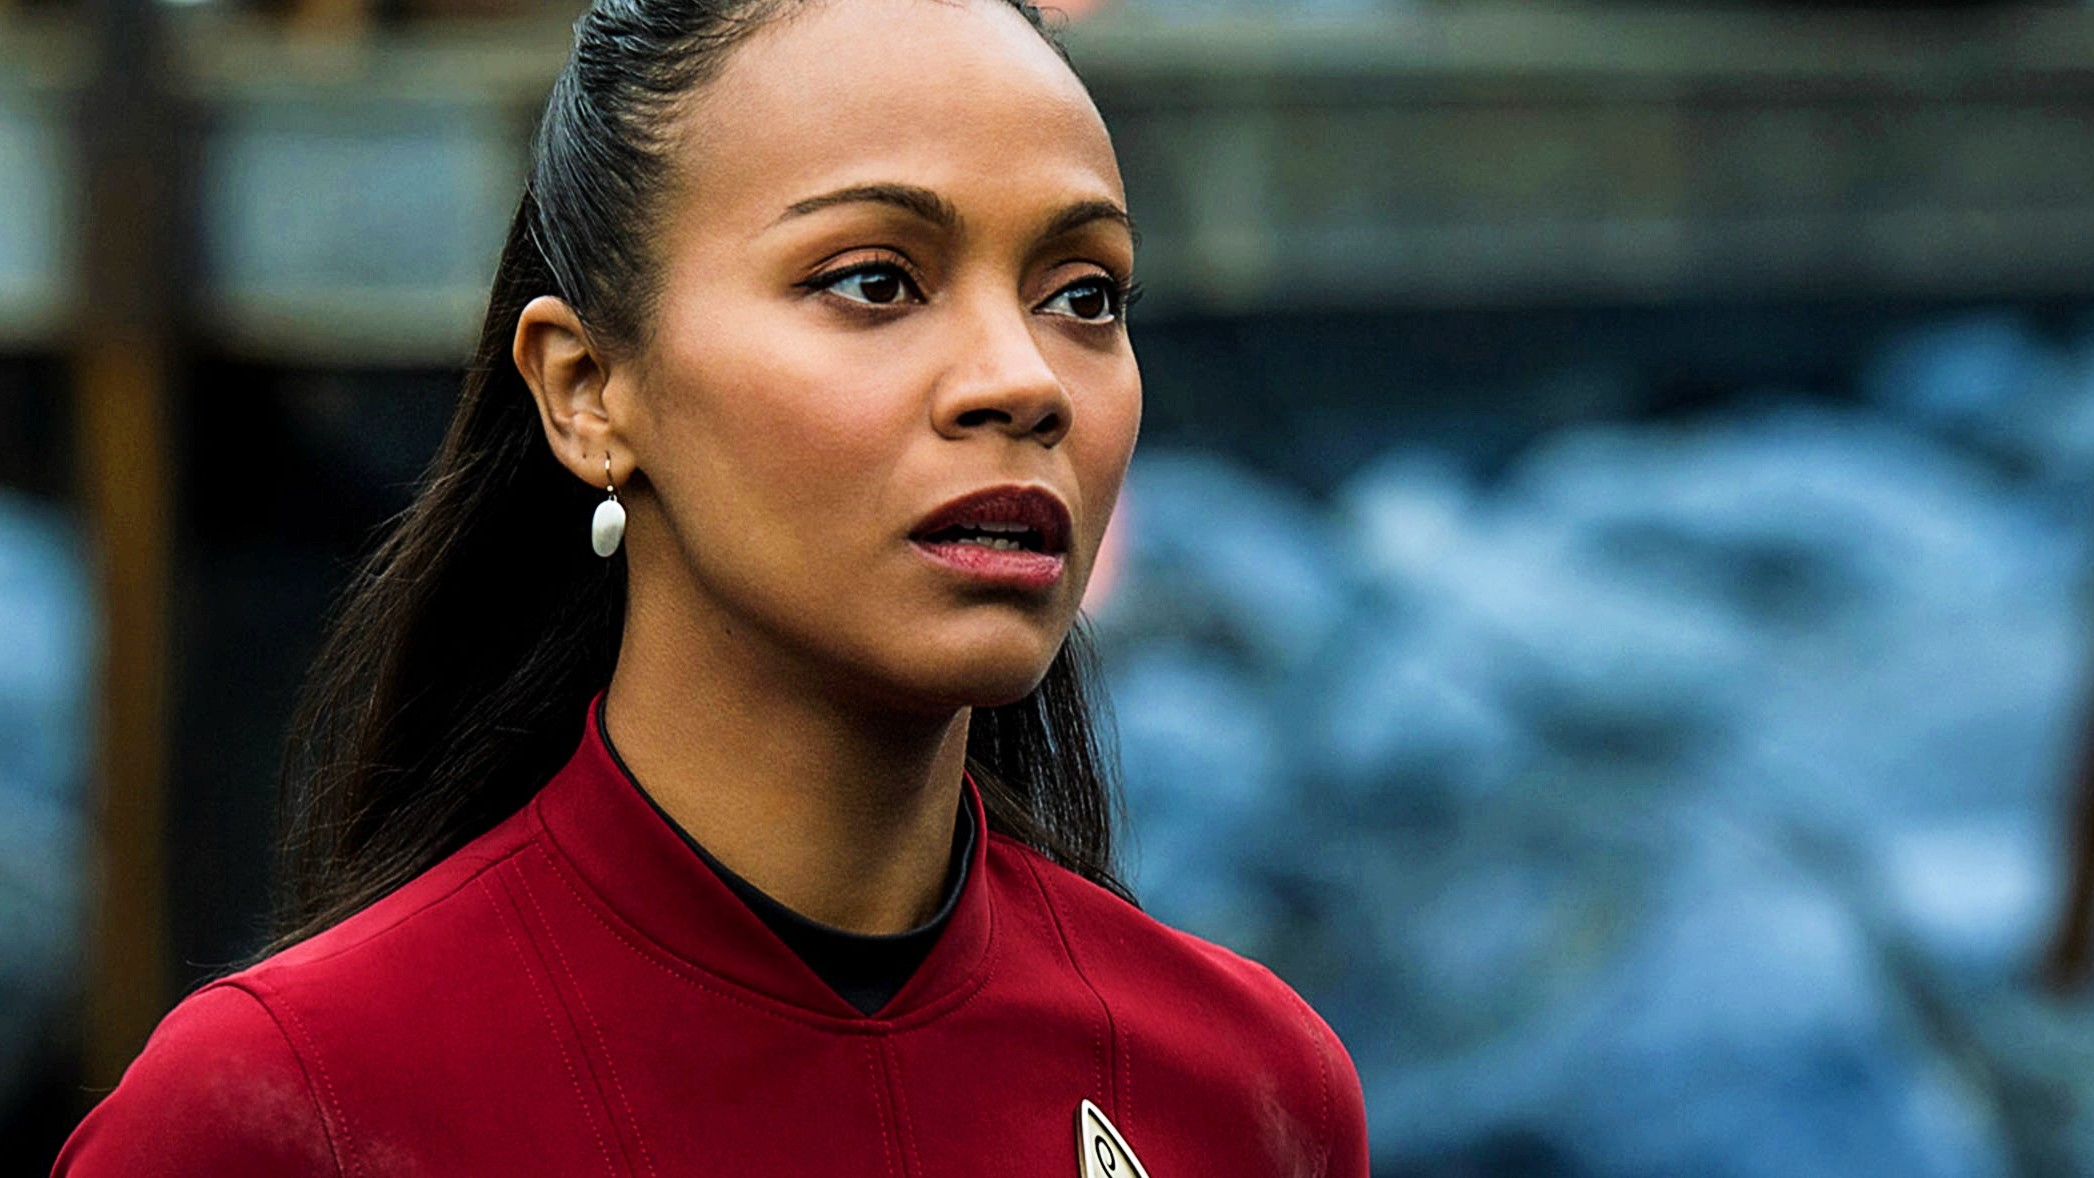 <p><span>It is hard to compete with a legend such as Nichelle Nichols, but that is exactly what Zoe Saldana had to do in filling Nichols’ shoes as Nyota Uhura. The smoking-hot Saldana starred in the three most recent </span><i><span>Star Trek</span></i><span> films and played her Uhura with the same amount of confidence and strength as her predecessor.</span></p>